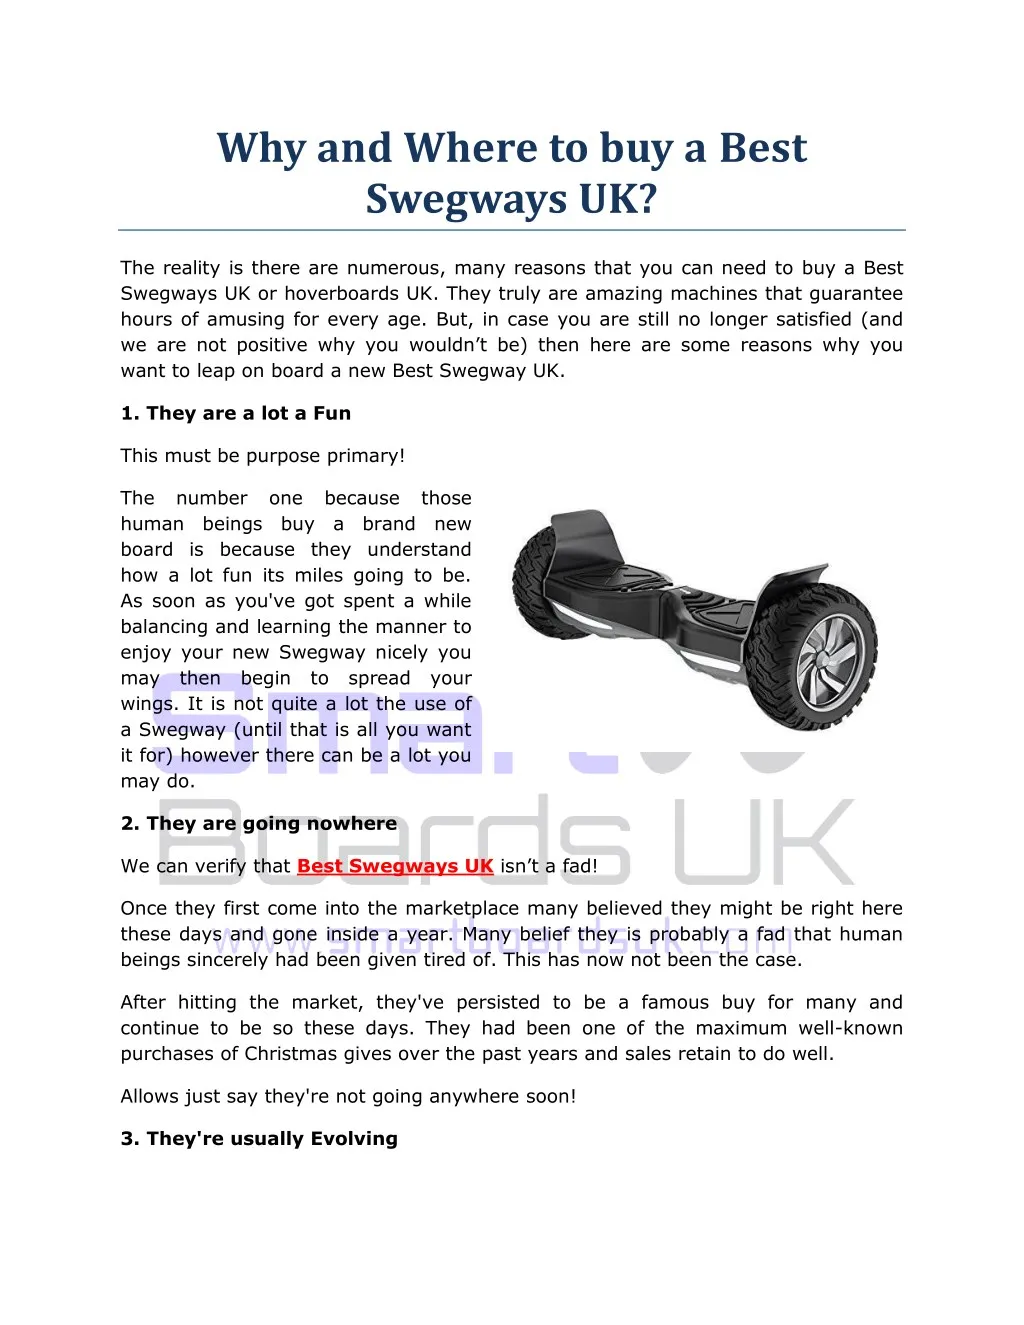 why and where to buy a best swegways uk